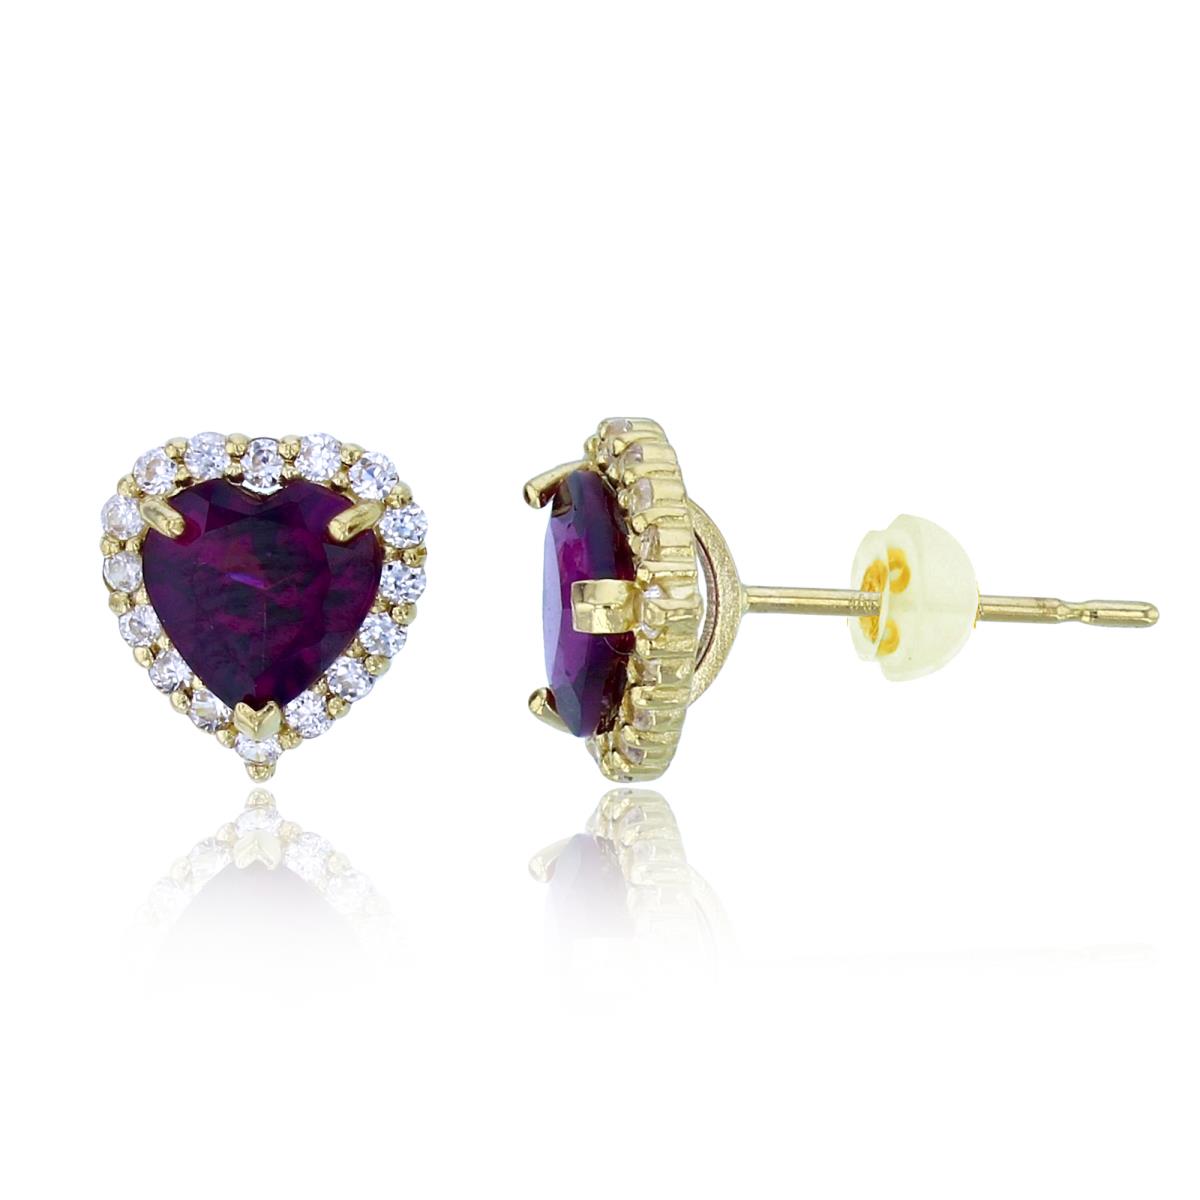 14K Yellow Gold 6mm HS Rhodolite & Wh.Zircon Halo Heart Studs with Silicon Backs